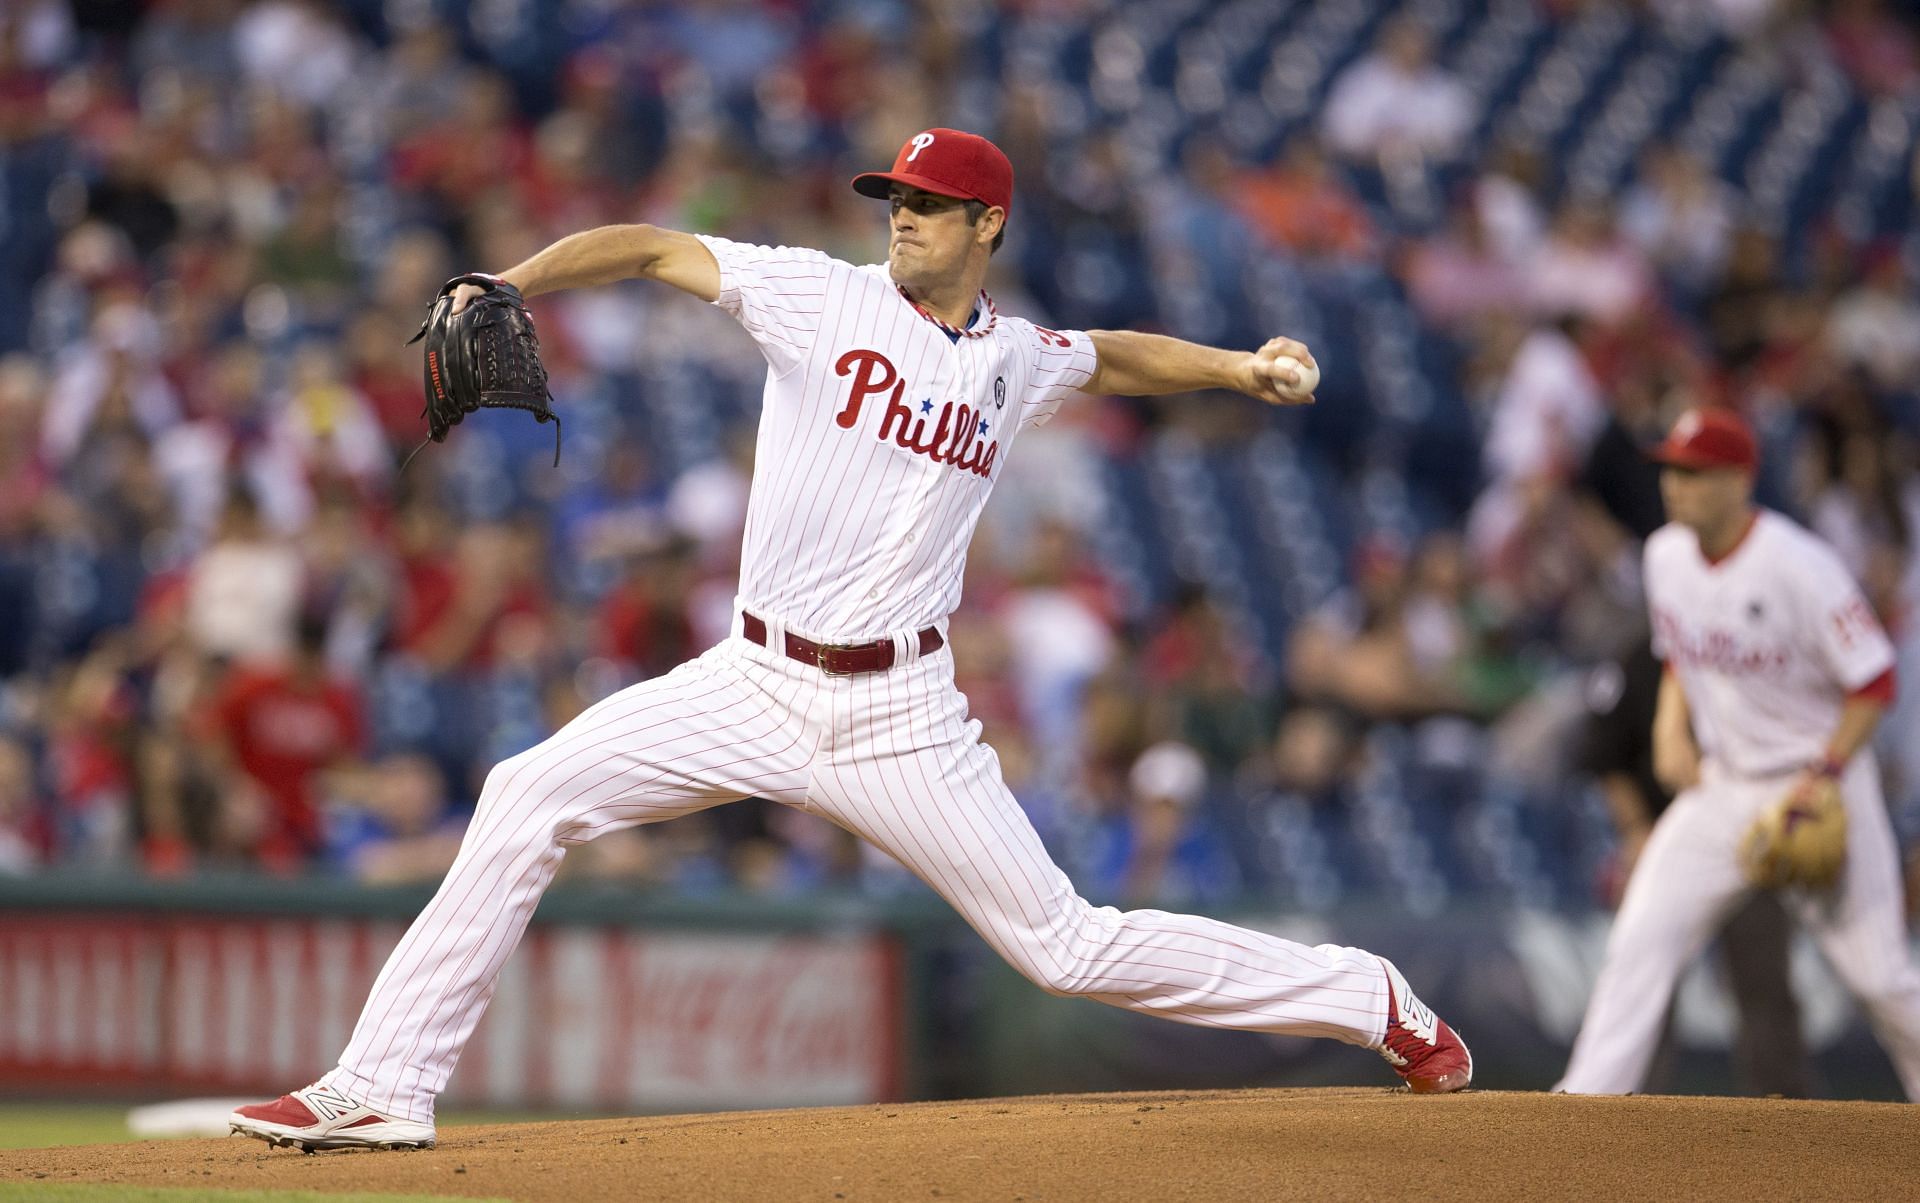 SP Cole Hamels looking for one last ride with the Padres